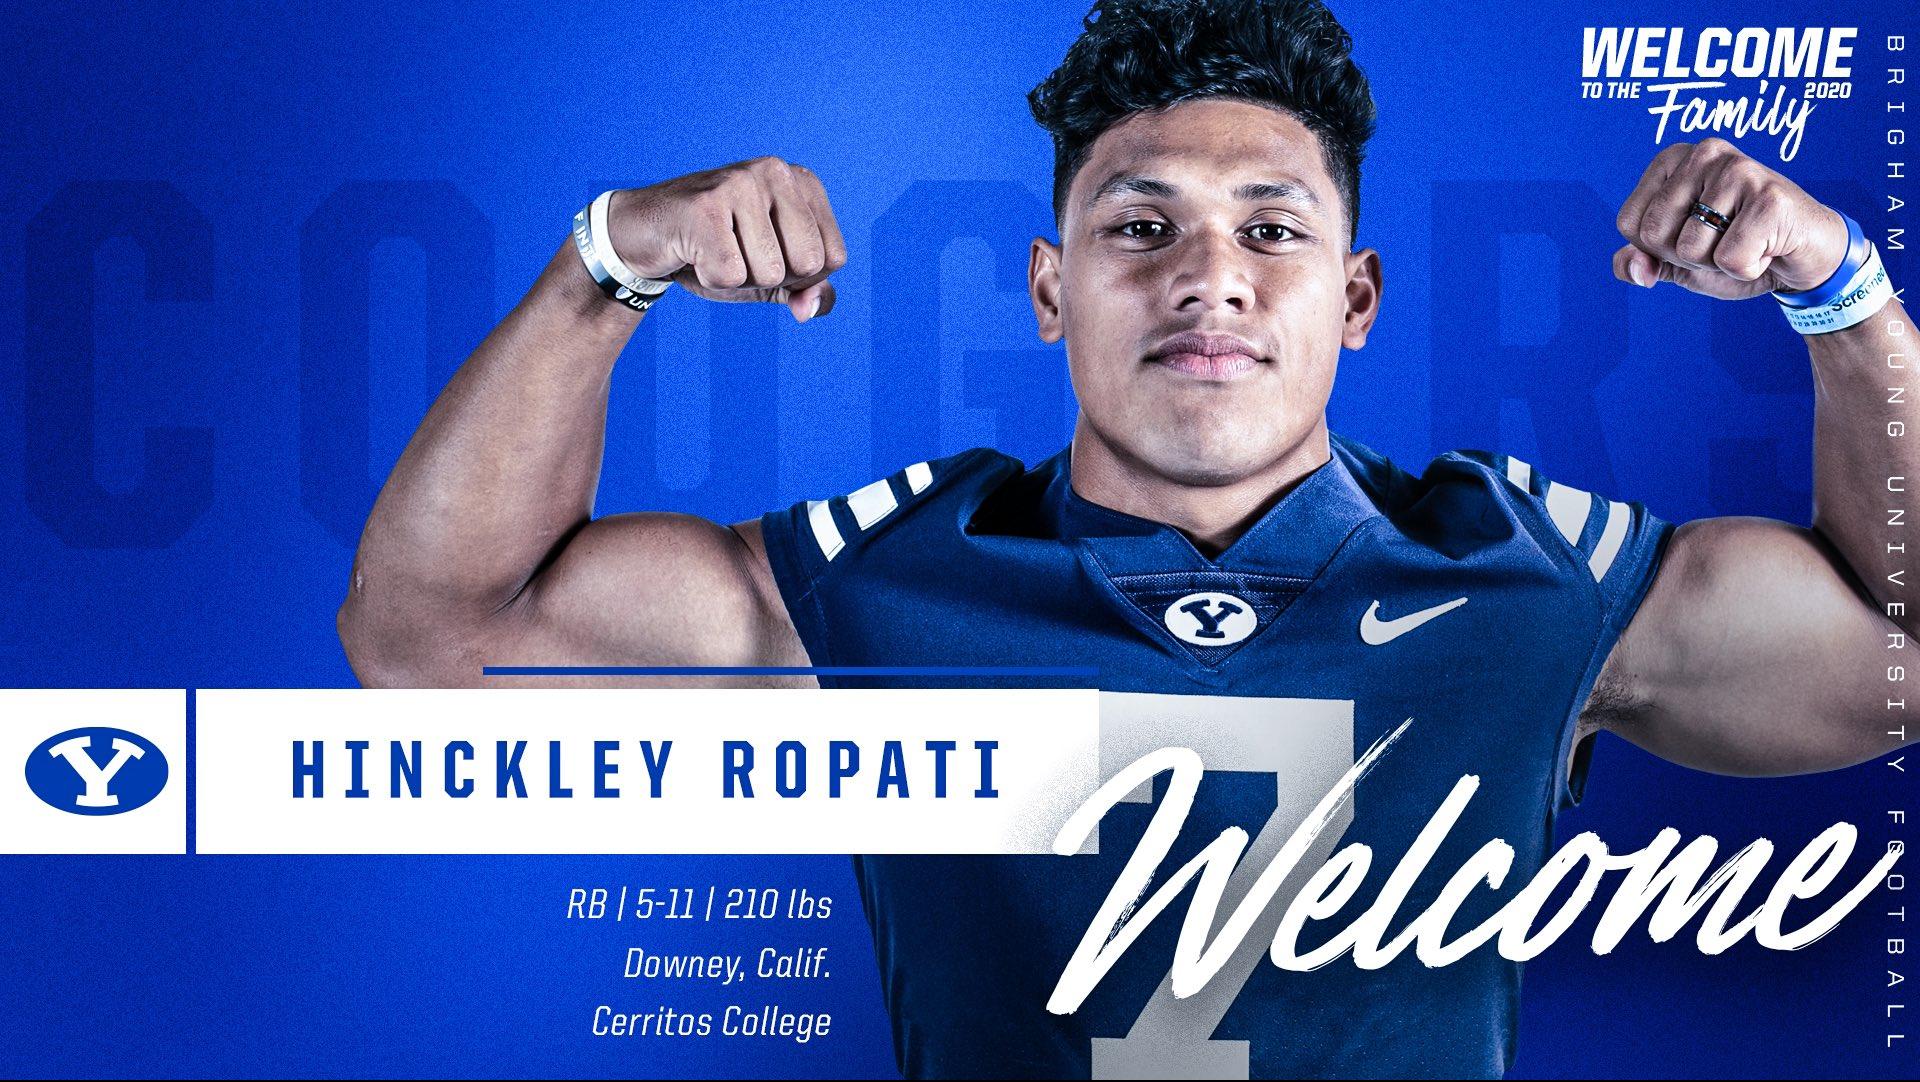 Hinckley Ropati to join BYU team for upcoming season